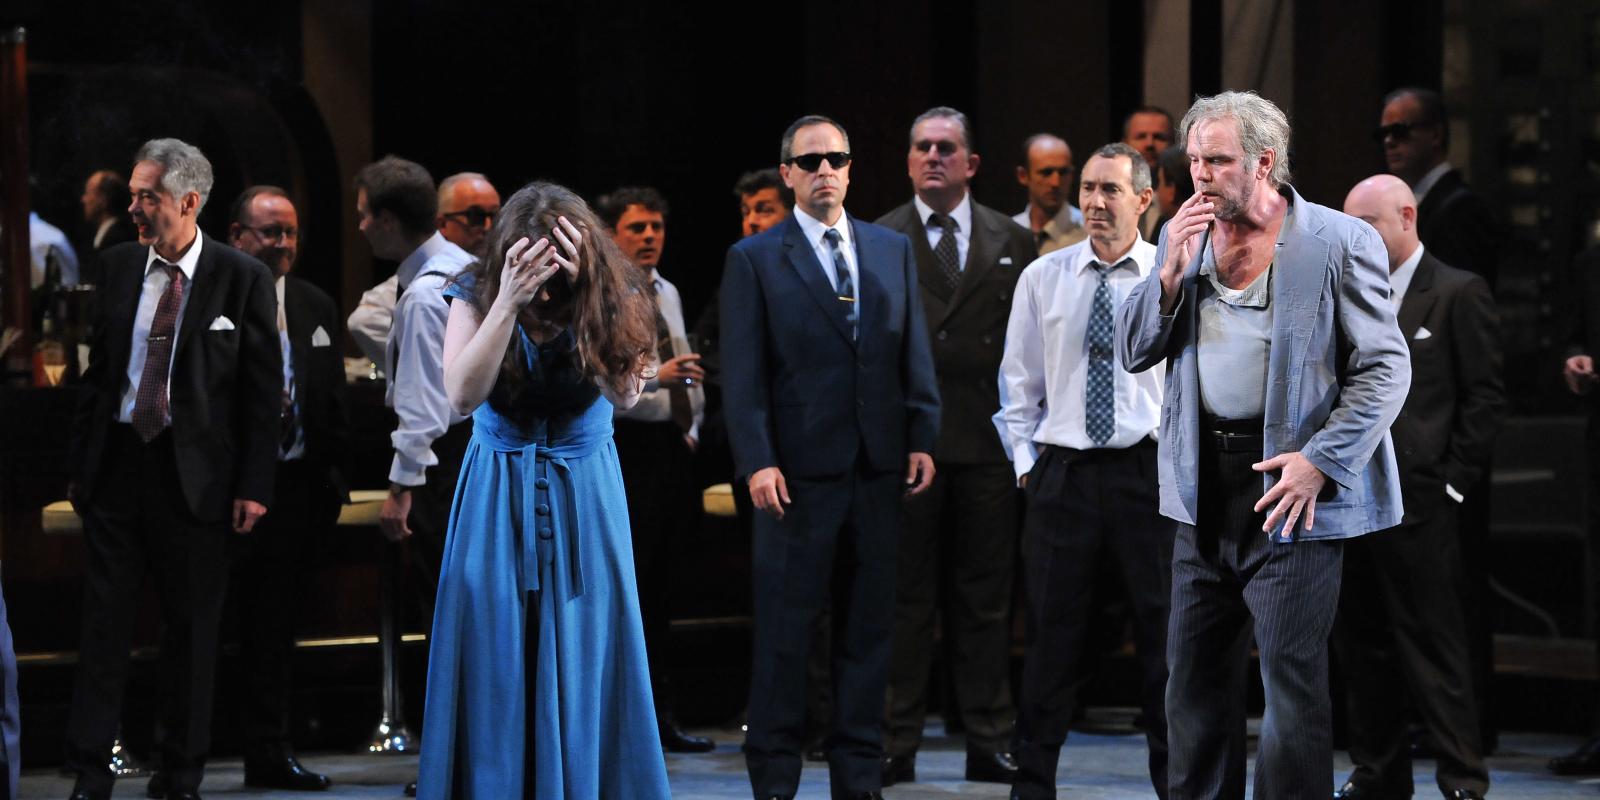 cast of rigoletto performing on stage with katherine whyte and anthony michaels-moore